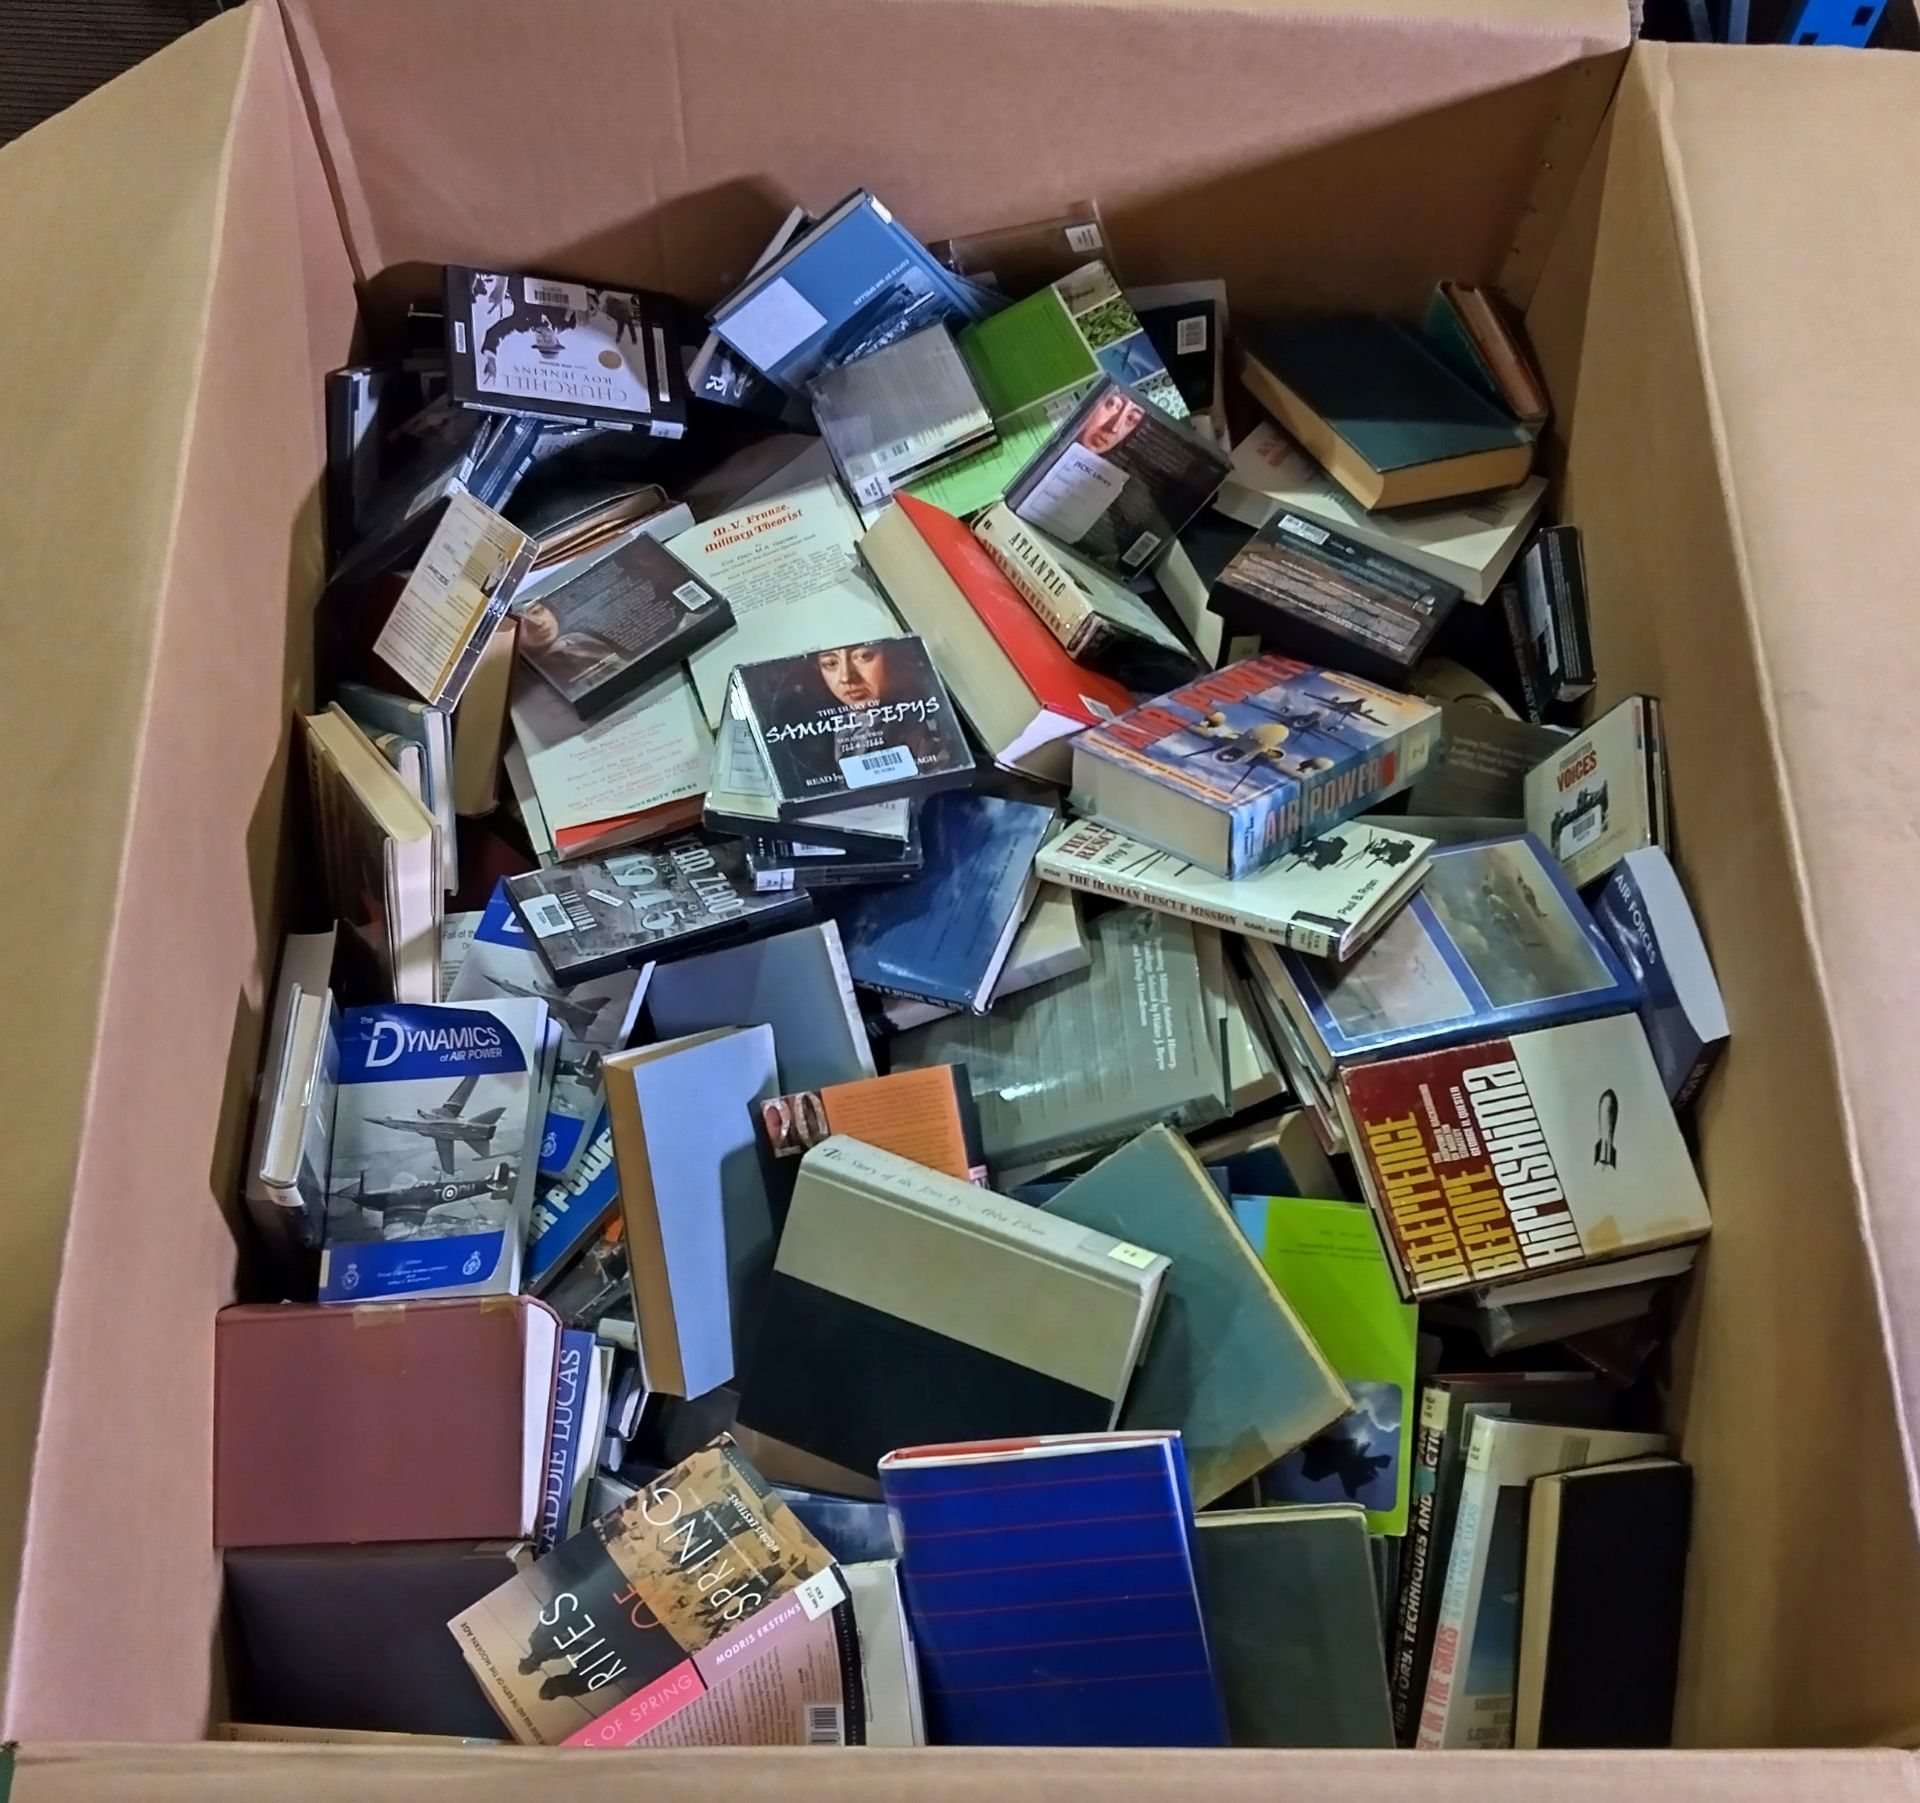 2x Pallet sized boxes of books - Fictional, Non-fictional, Military, mixed genre - Image 7 of 11